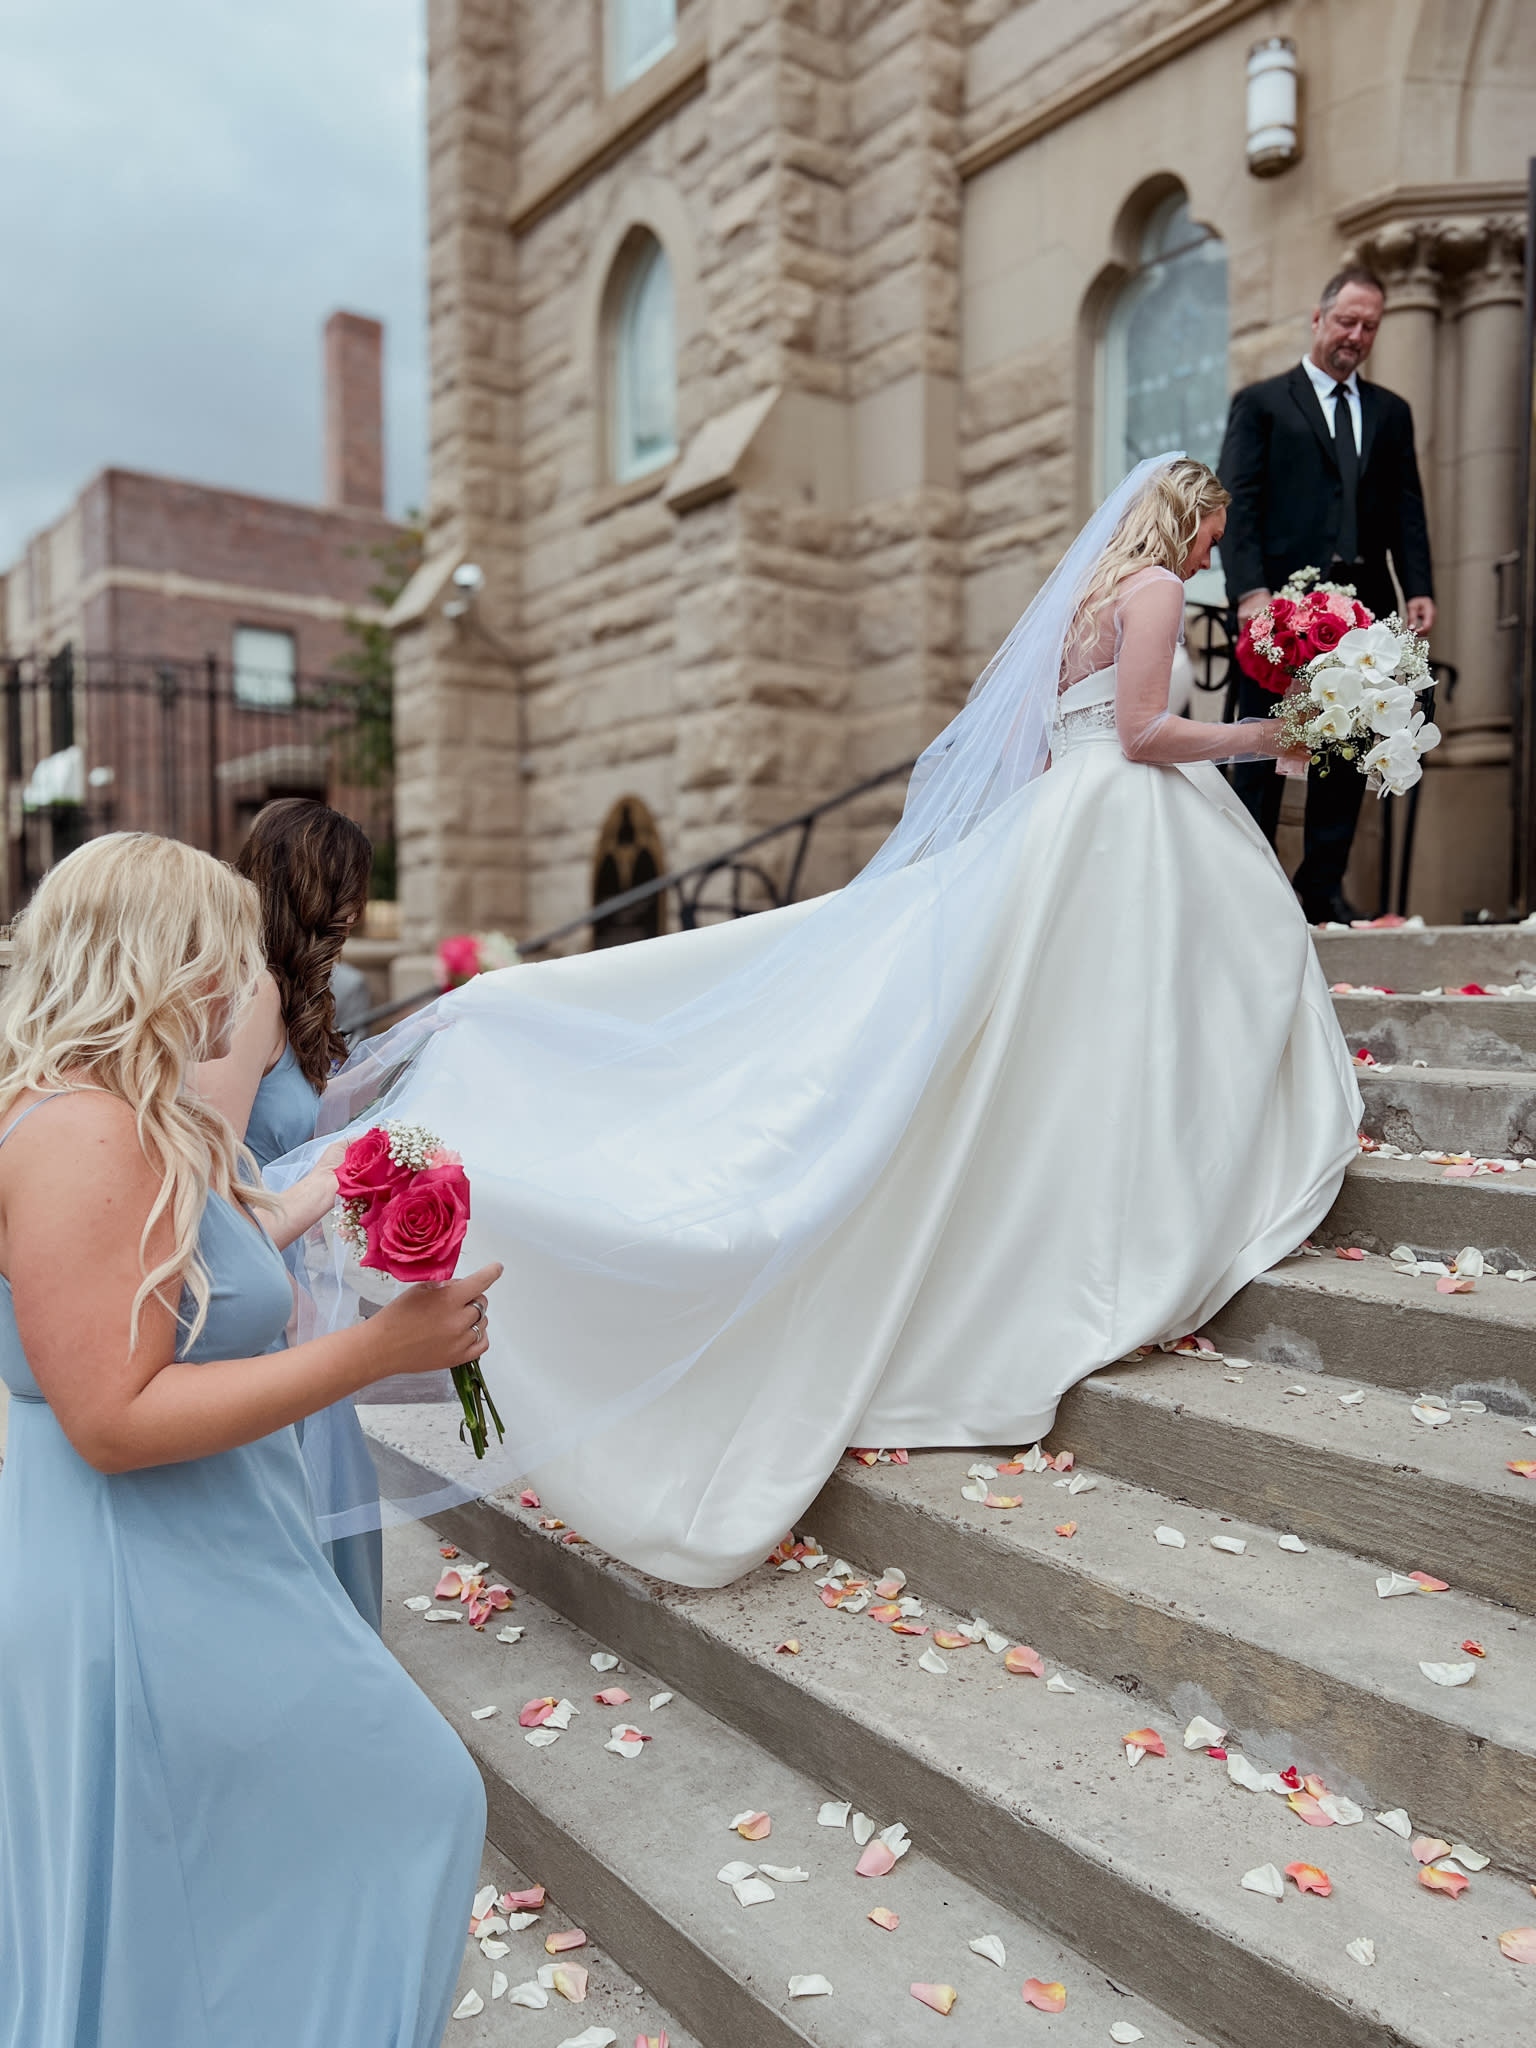 image shows a bride walking up steps with her bridesmaids assisting